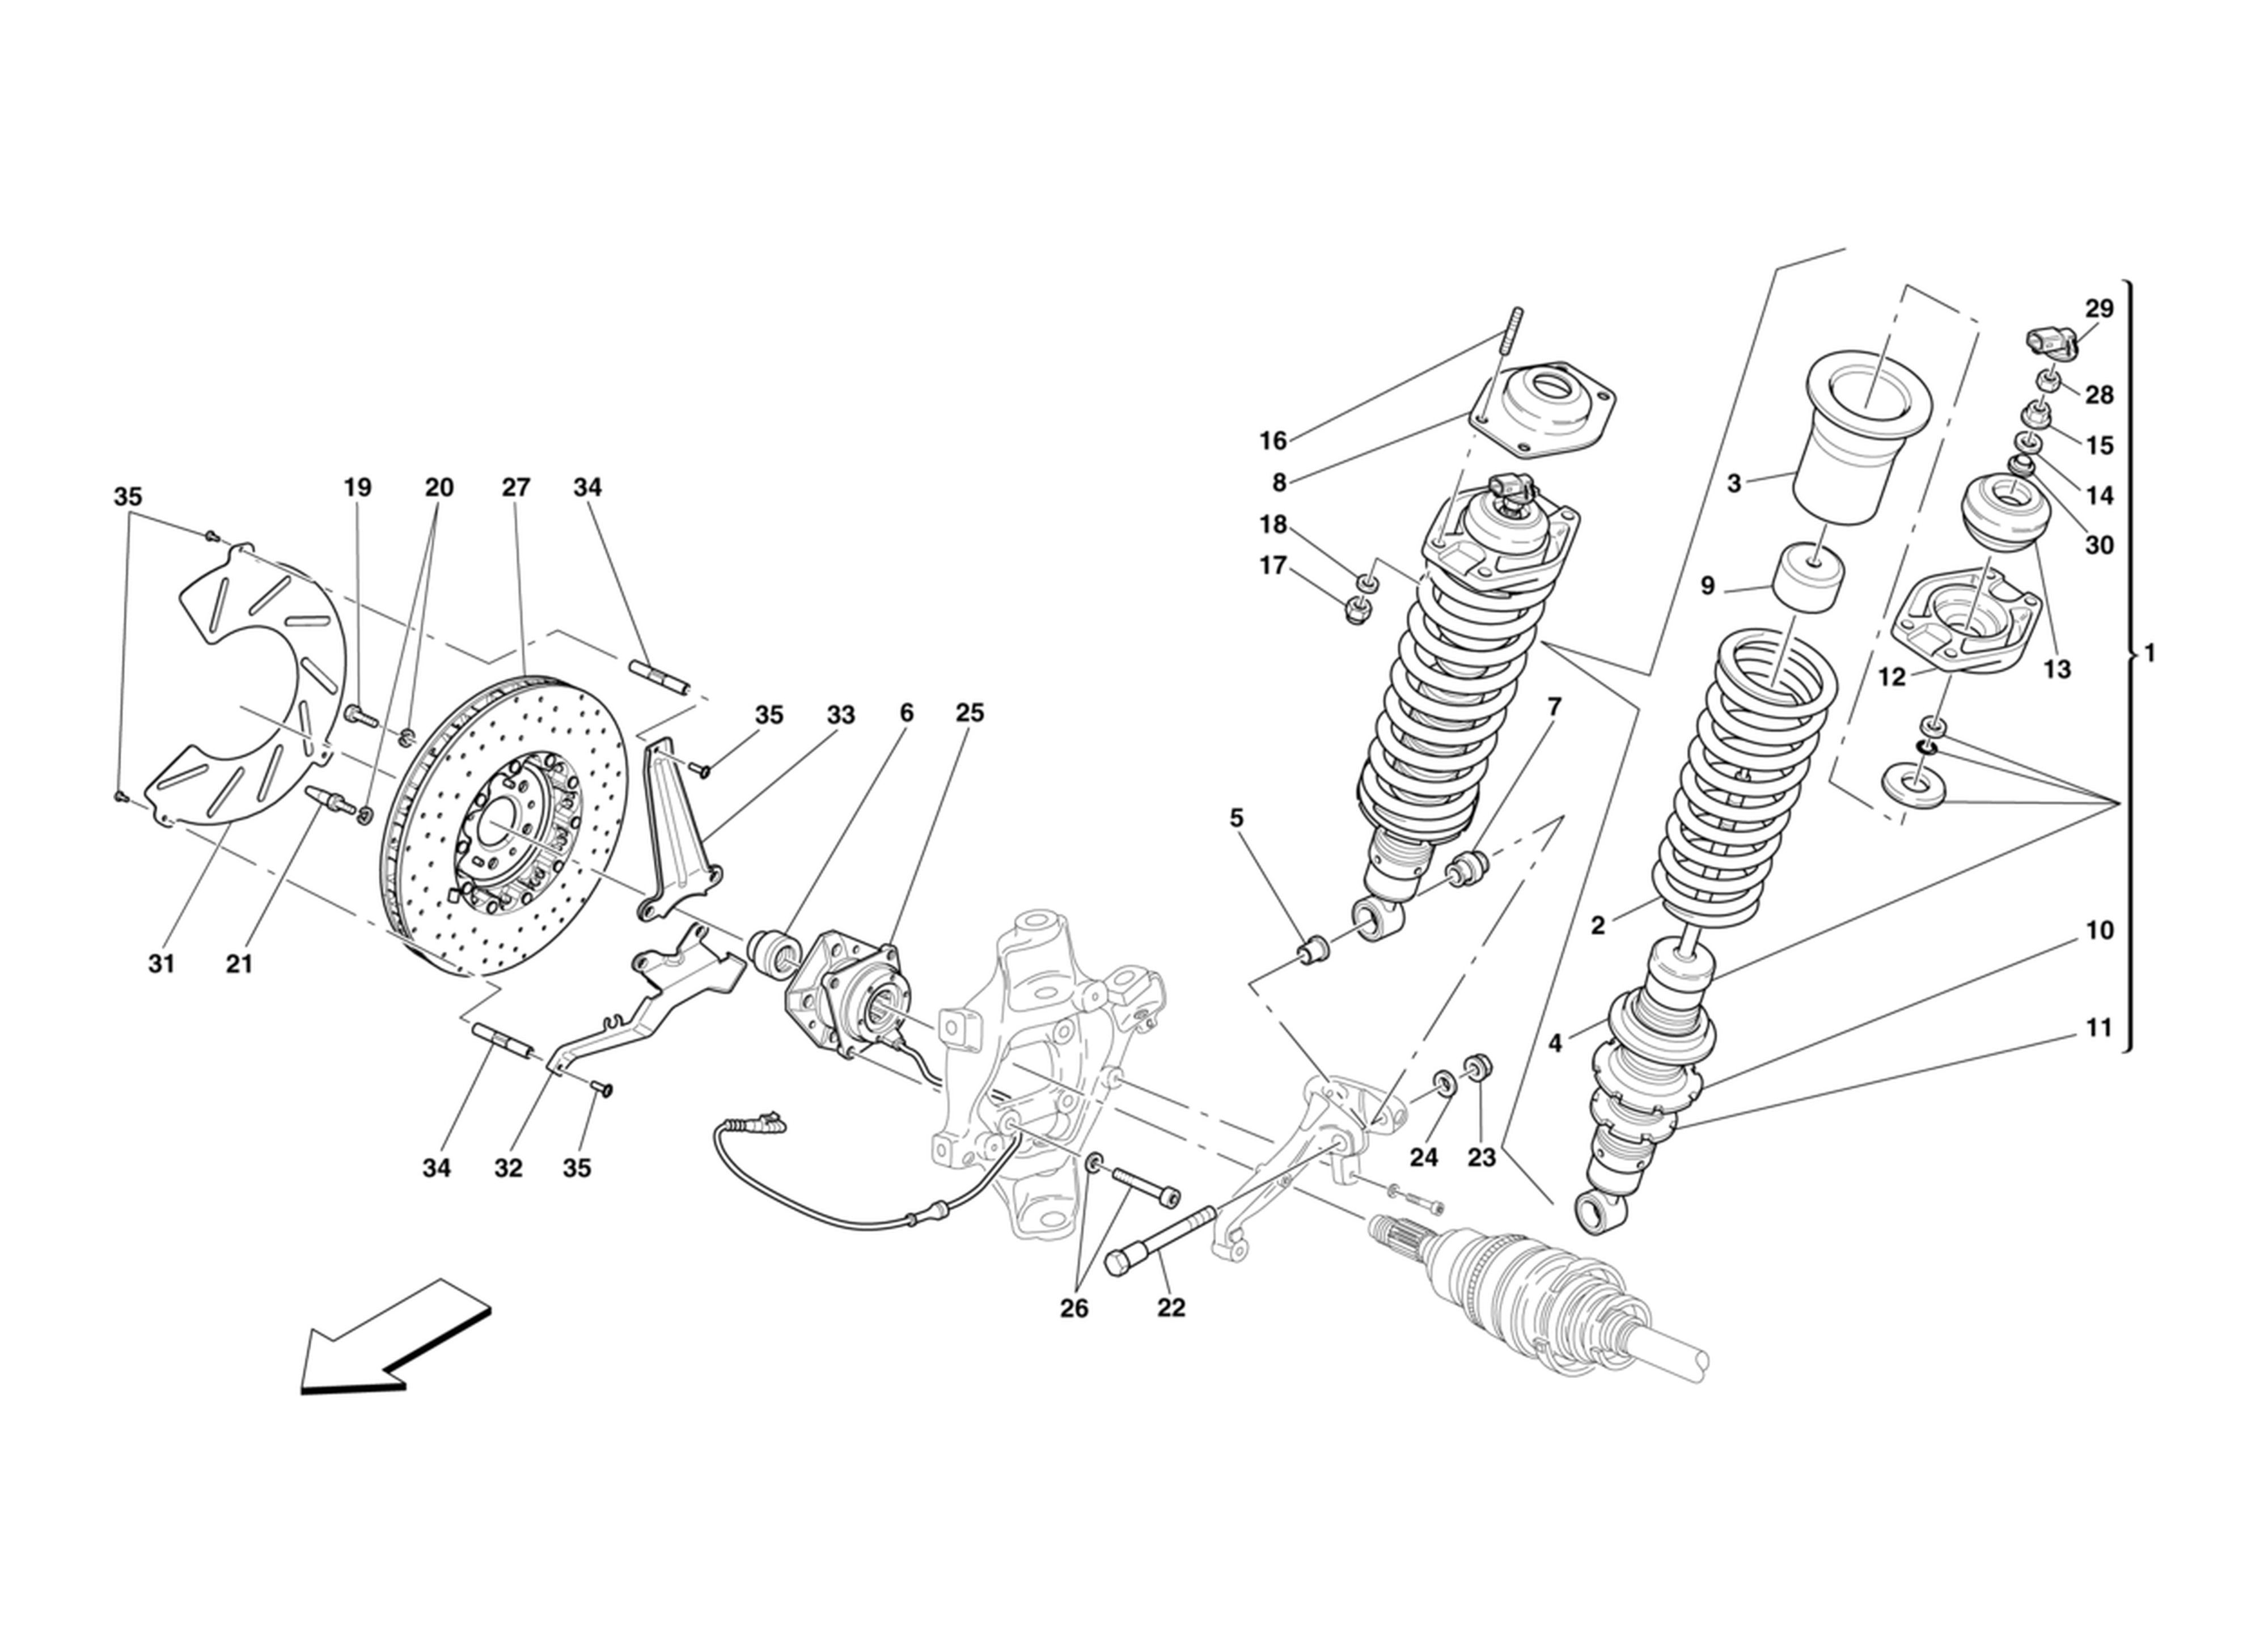 Schematic: Rear Suspension Shock Absorber And Brake Disc